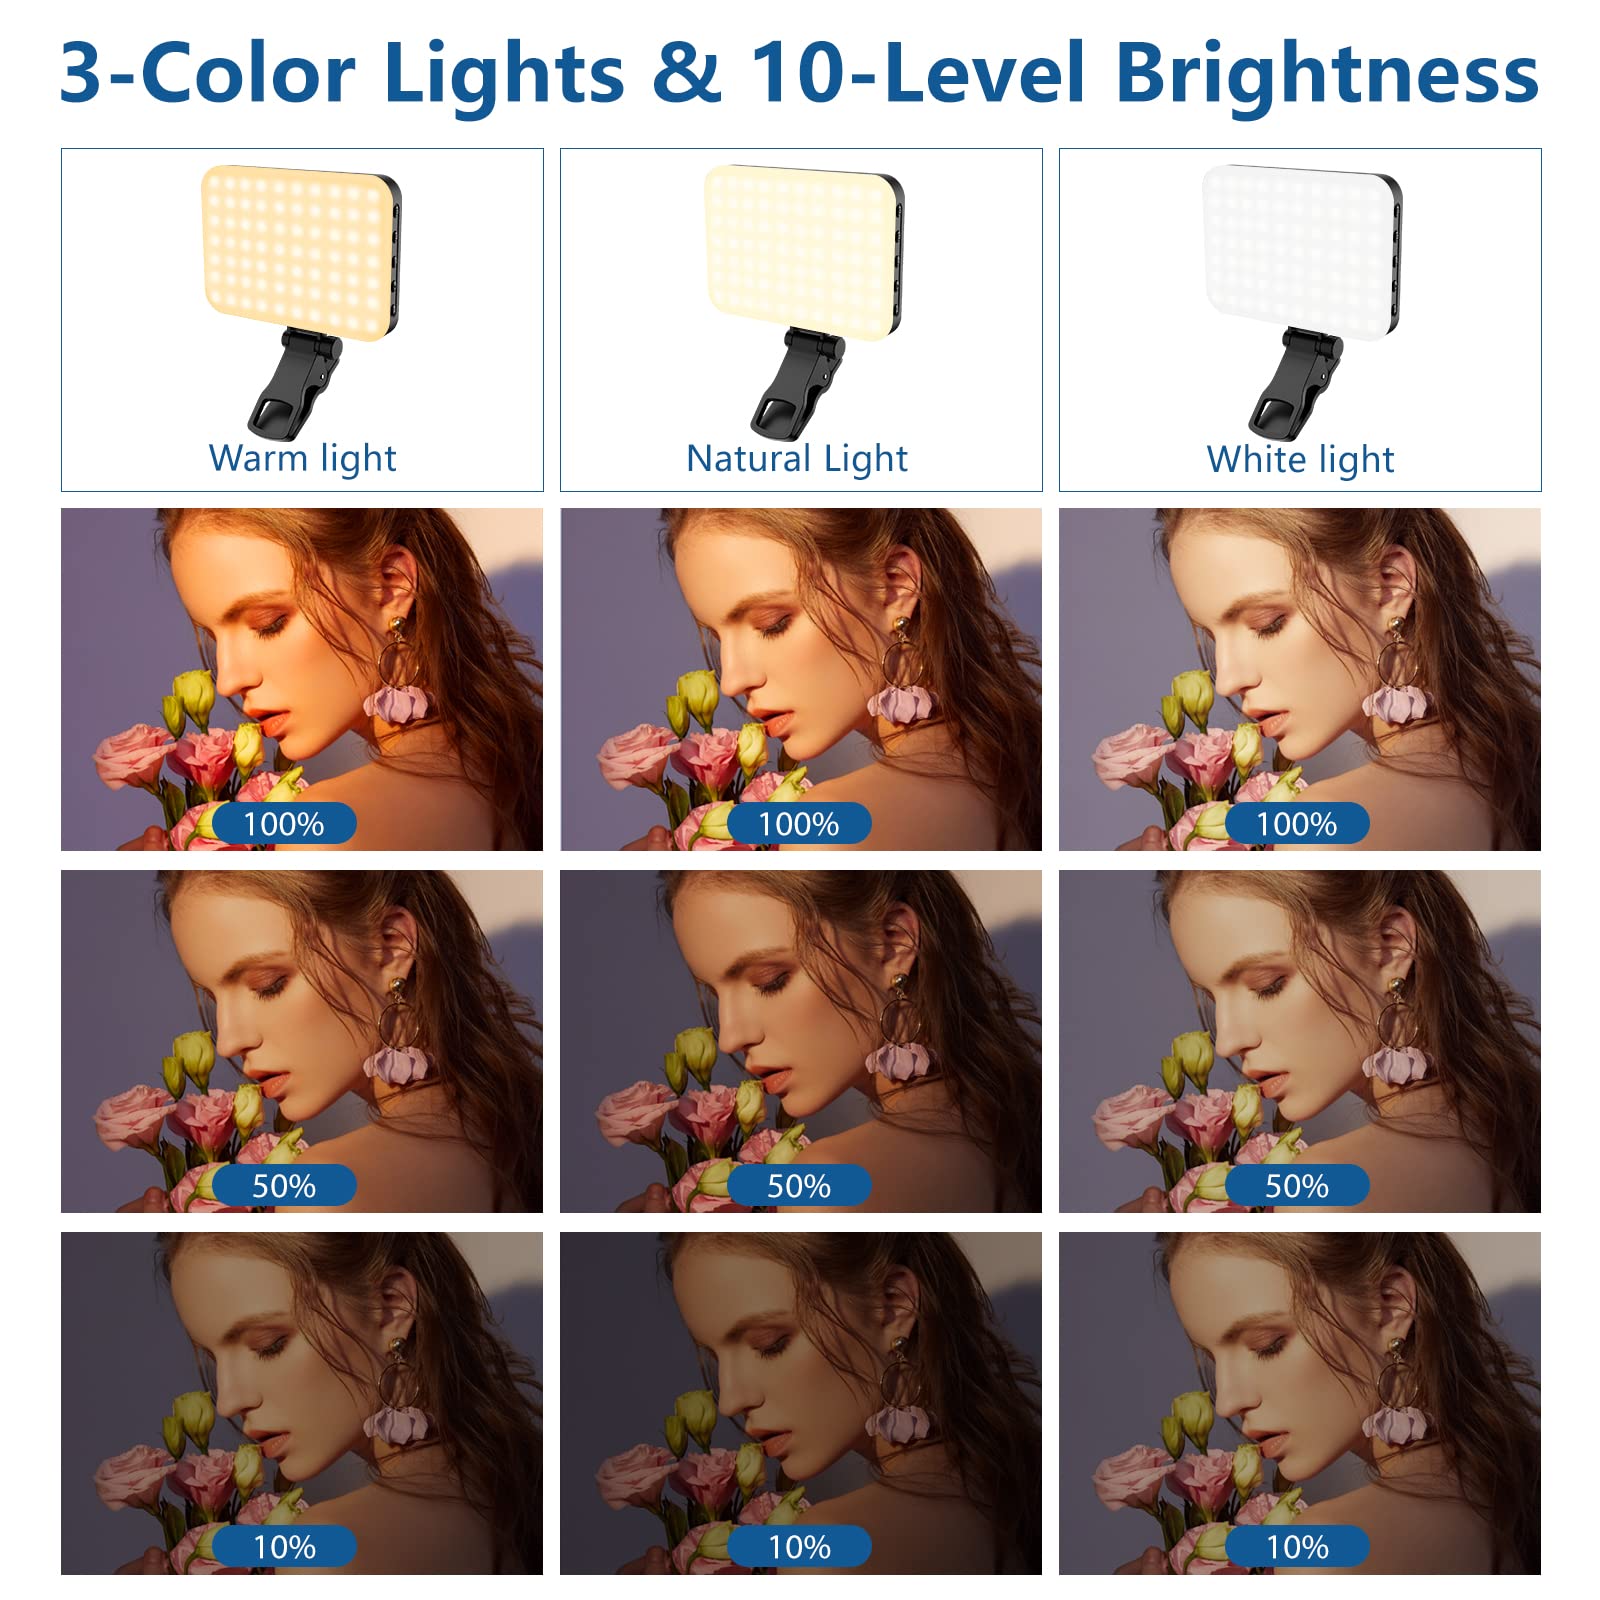 ALTSON 60 LED Portable Selfie Light Video Conference Lighting with Clip & Camera Tripod Adapter Rechargeable 2200mAh CRI 97+, 3 Light Modes for Phone iPhone Webcam Laptop Photo Makeup